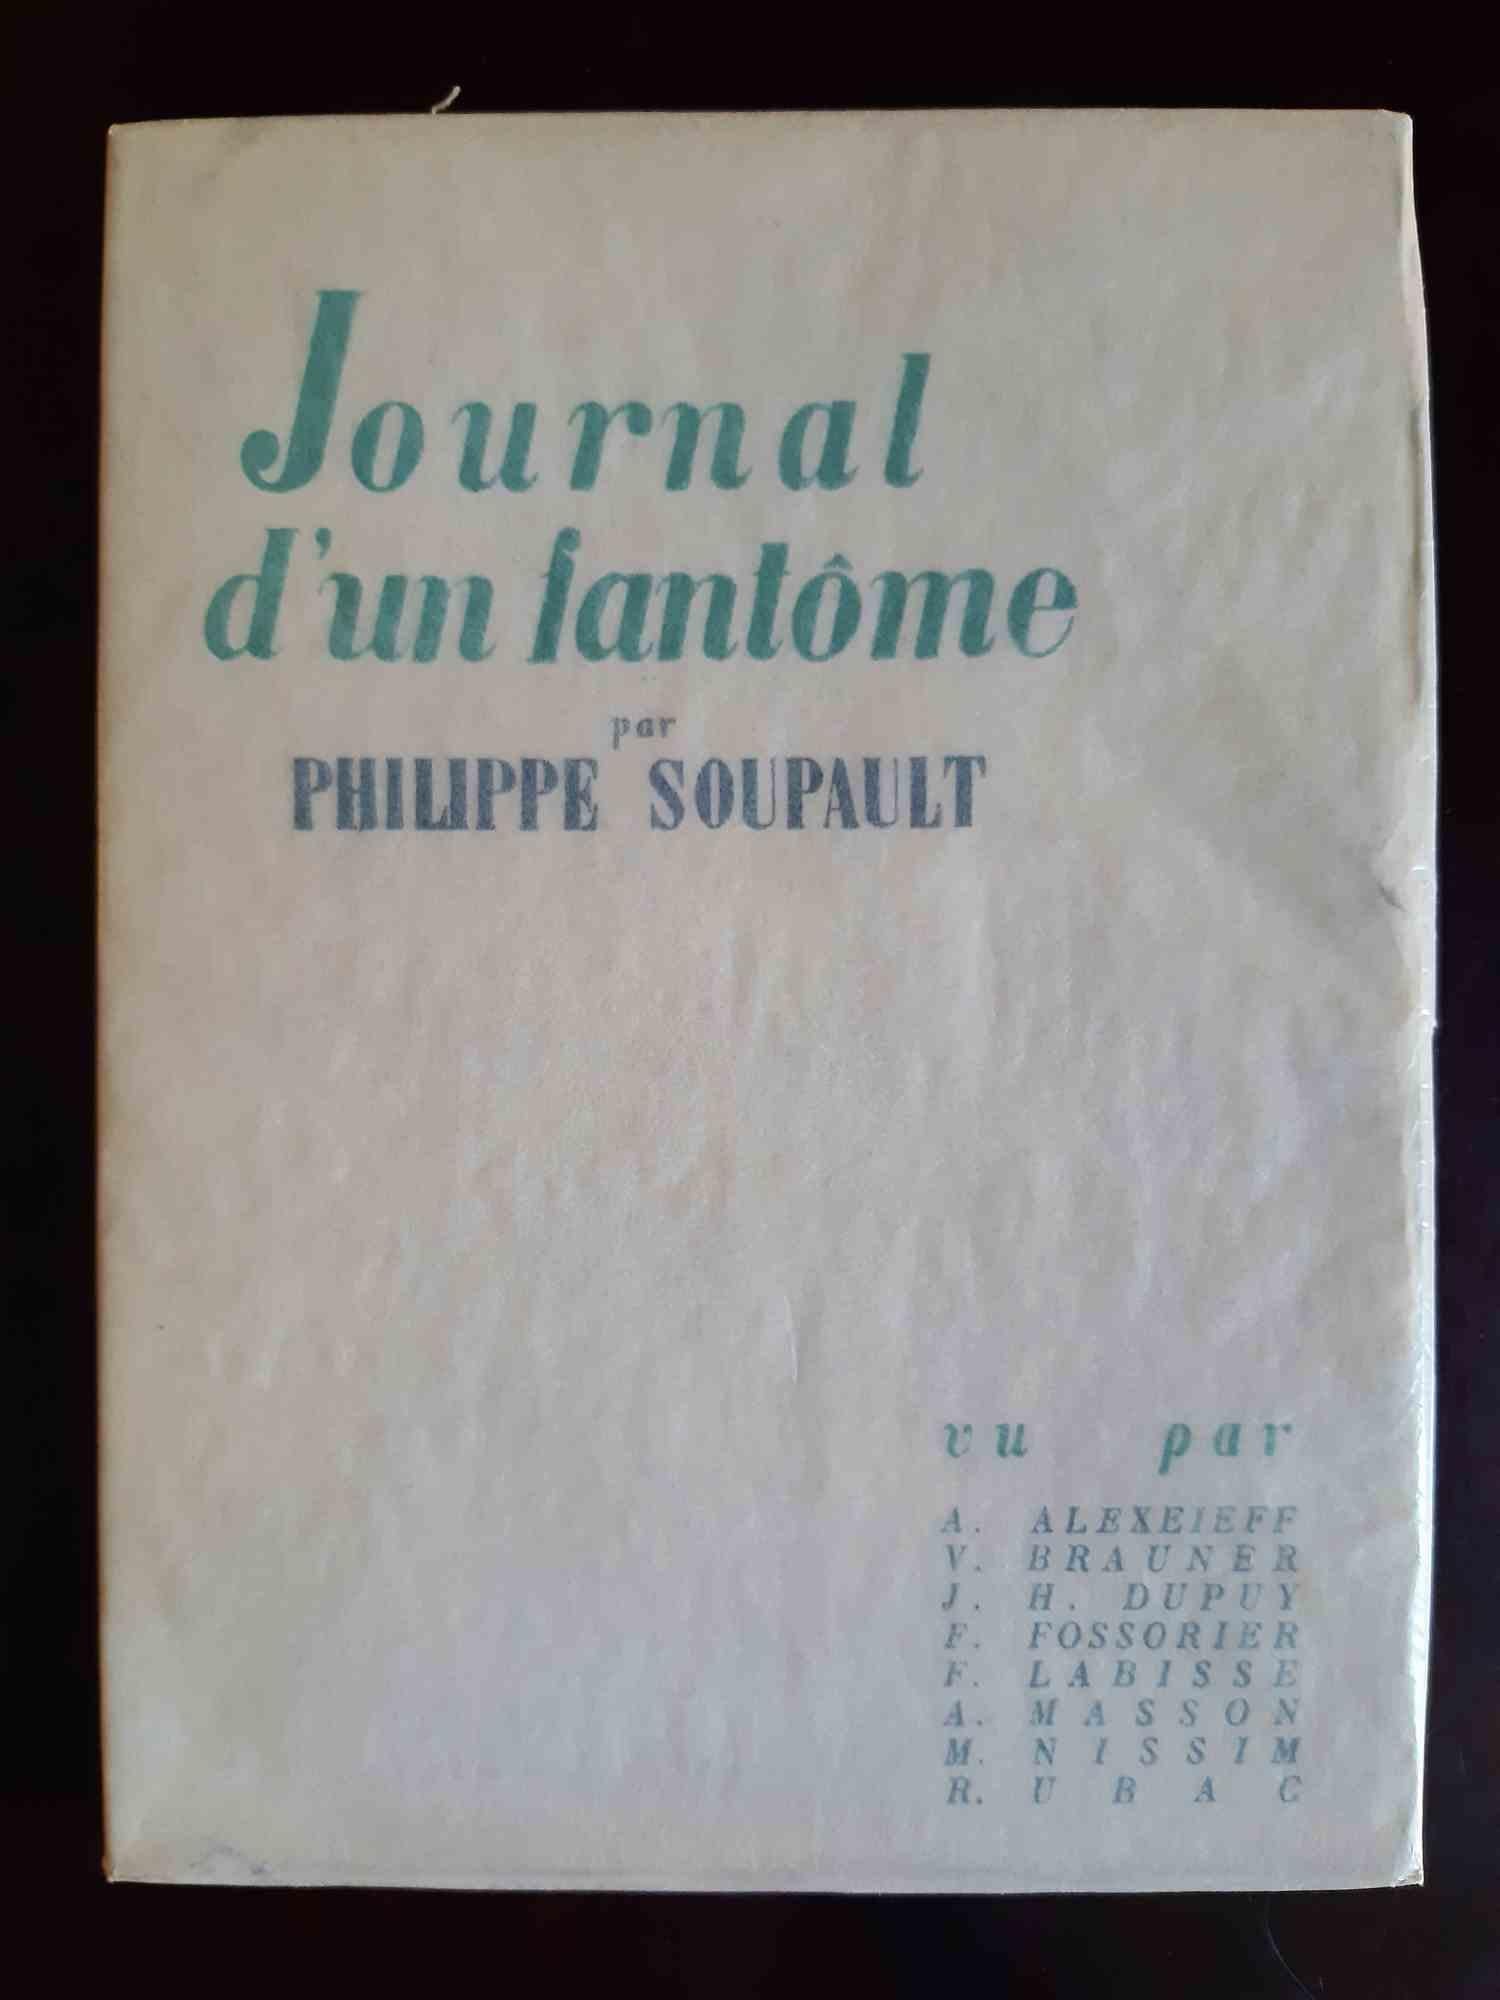 Journal d’un Fantome - Rare Book Illustrated by Various Artists - 1946 For Sale 1